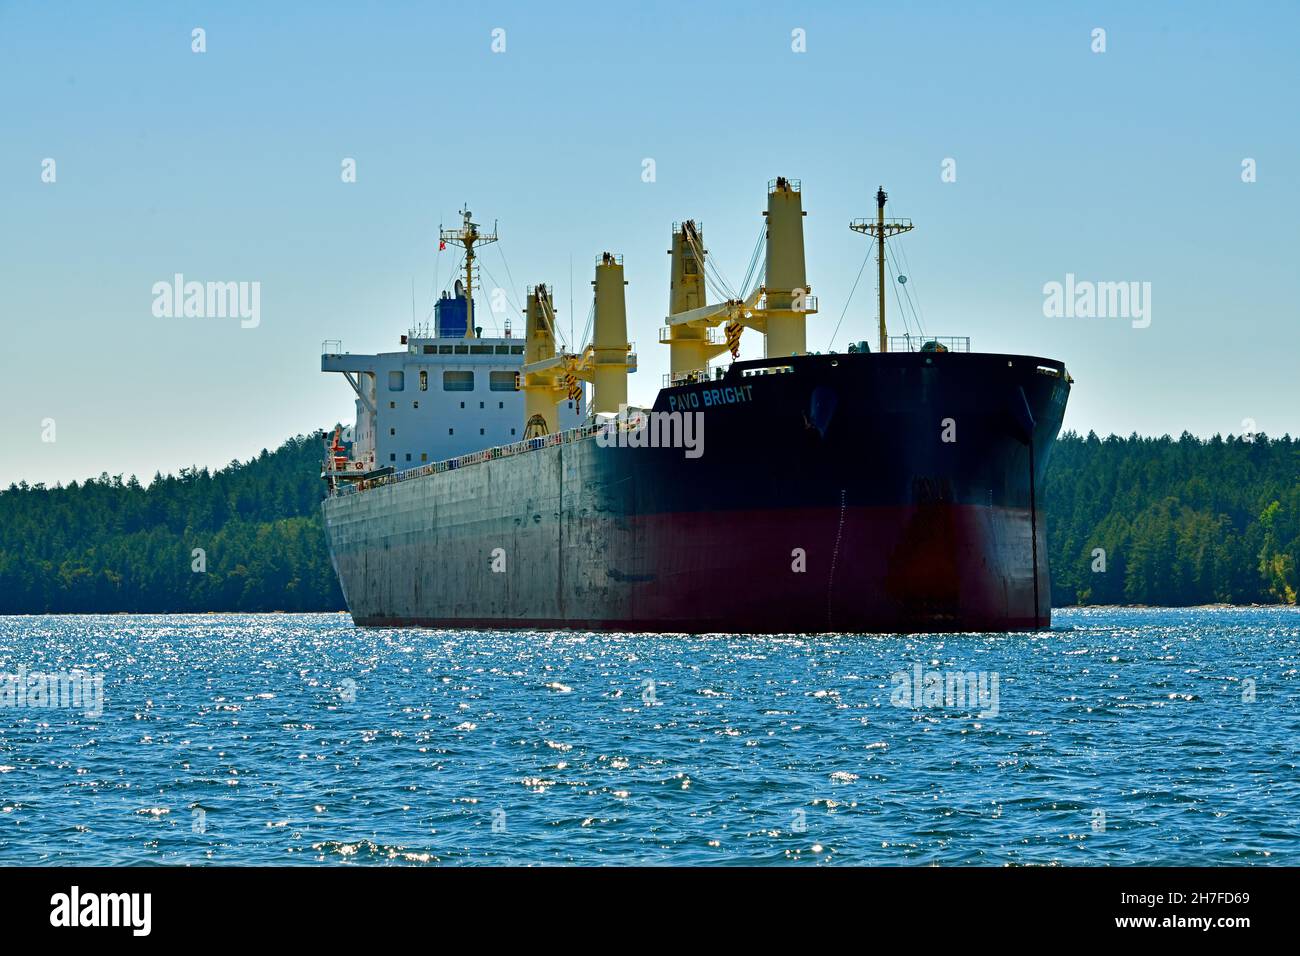 An ocean going vessel moored in the Nanaimo Harbour waiting for a load of wood products on Vancouver Island British Columbia Canada. Stock Photo